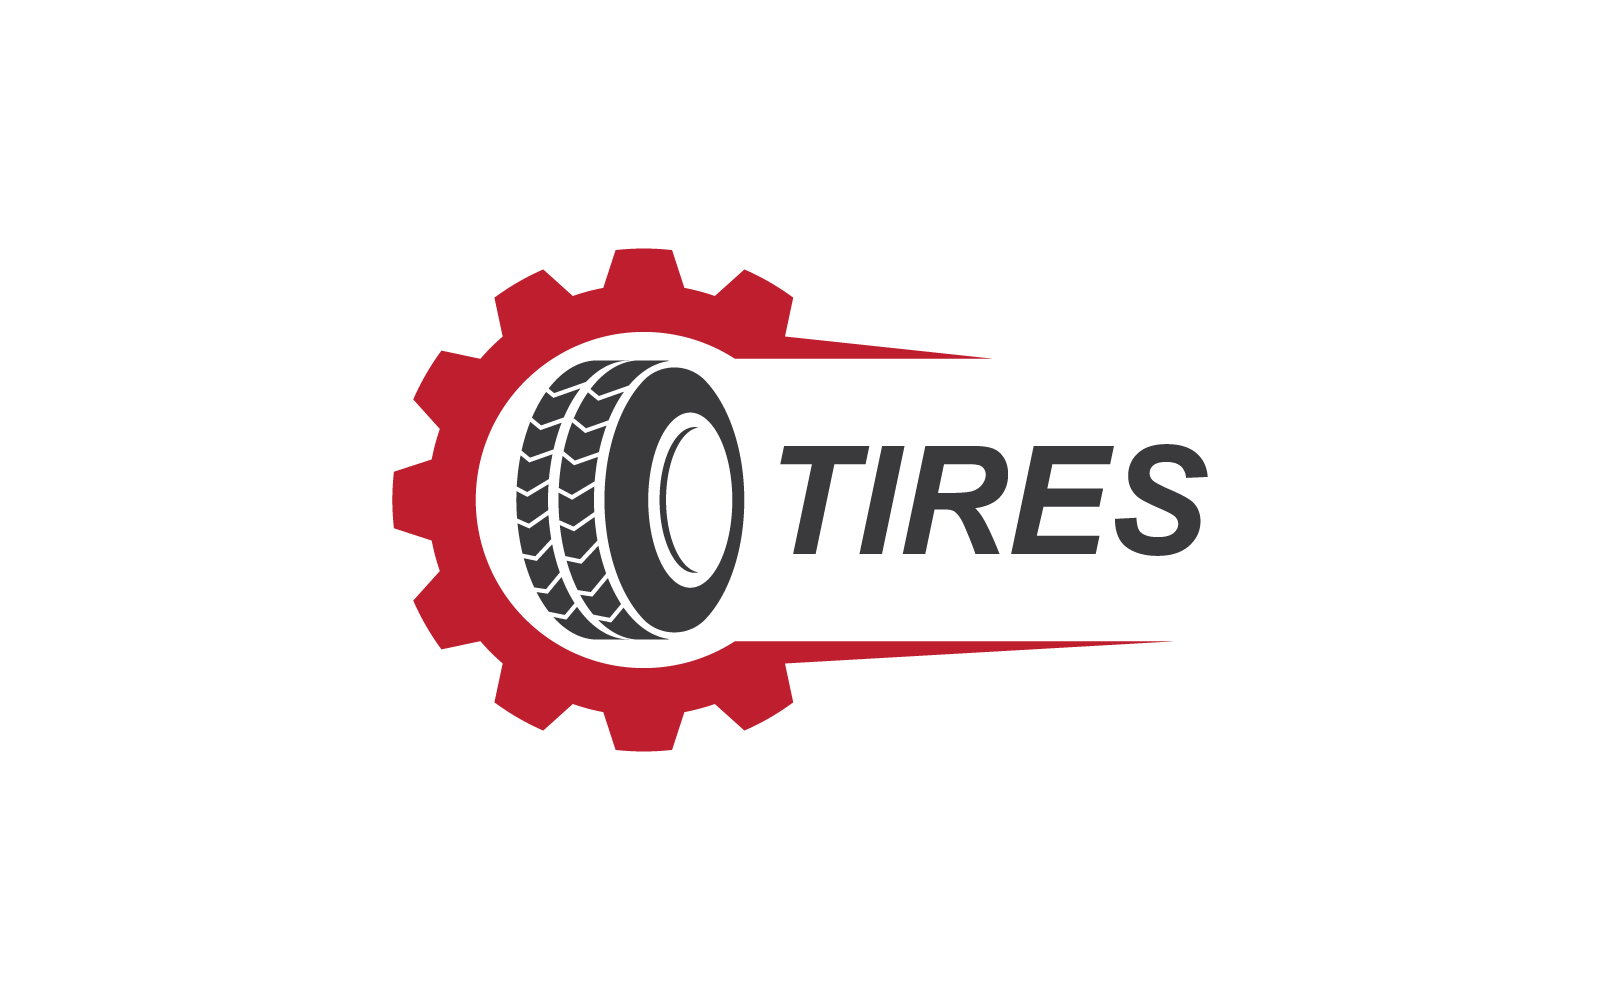 Tires and gear illustration logo icon vector template